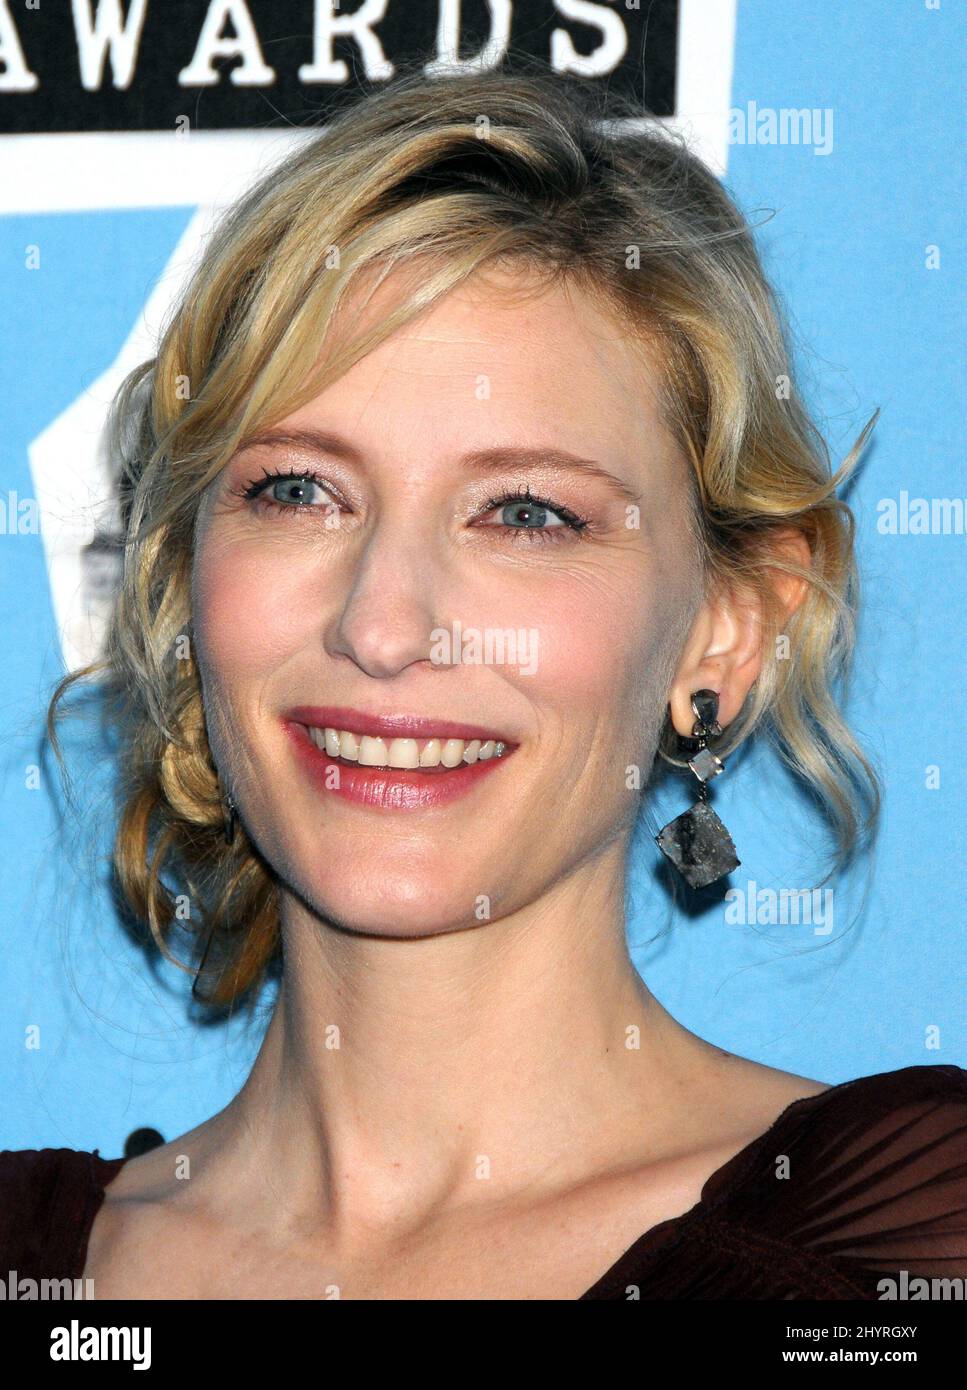 Cate Blanchett at the 2008 Film Independent Spirit Awards held at Santa Monica Beach in Los Angeles. Stock Photo